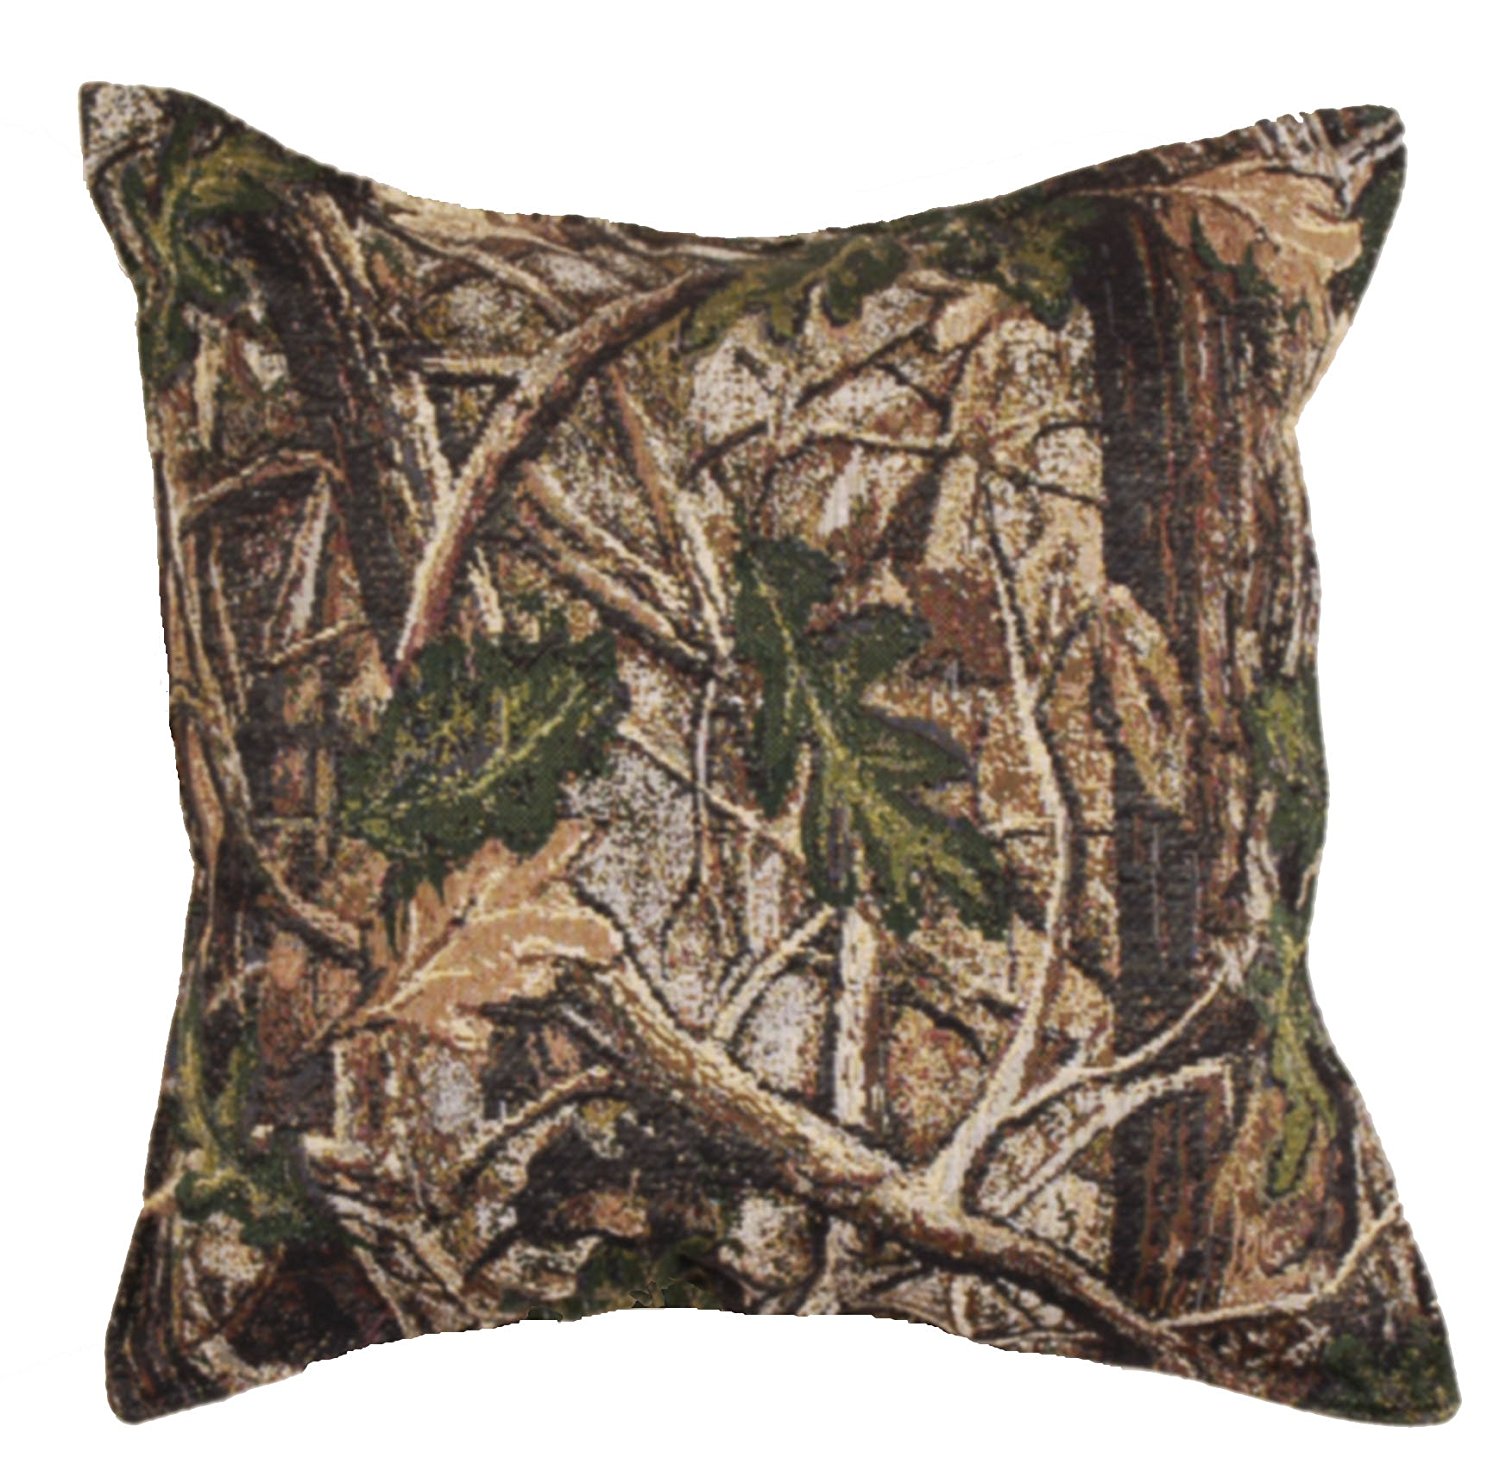 Amazon.com: Simply Home Nature's Camo Tapestry Pillow: Home & Kitchen